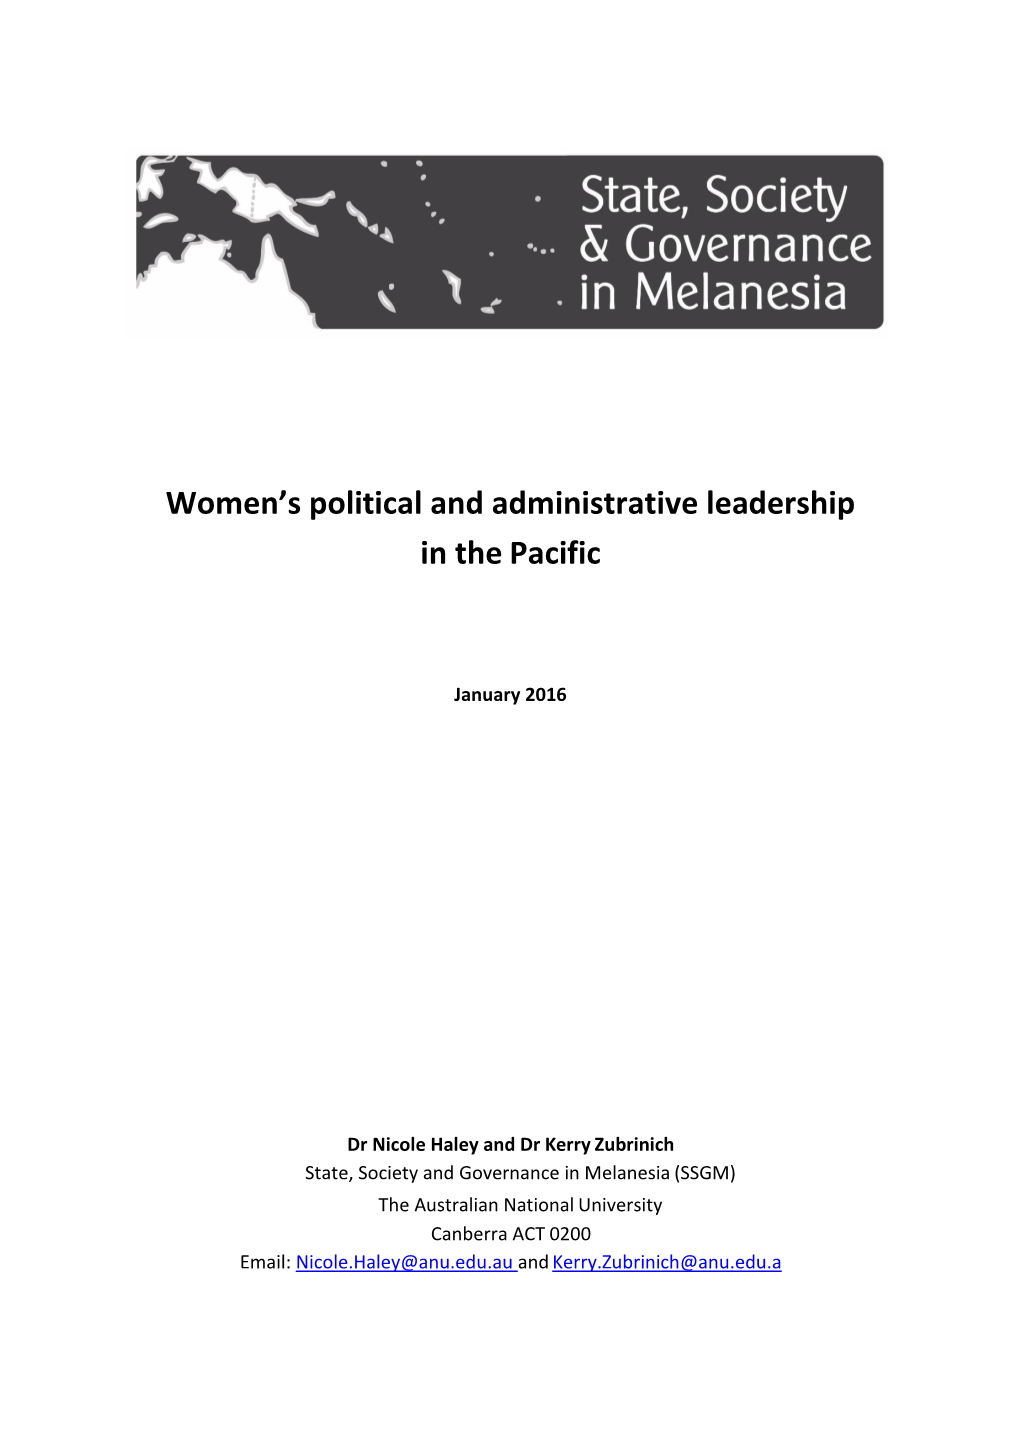 Women's Political and Administrative Leadership in the Pacific